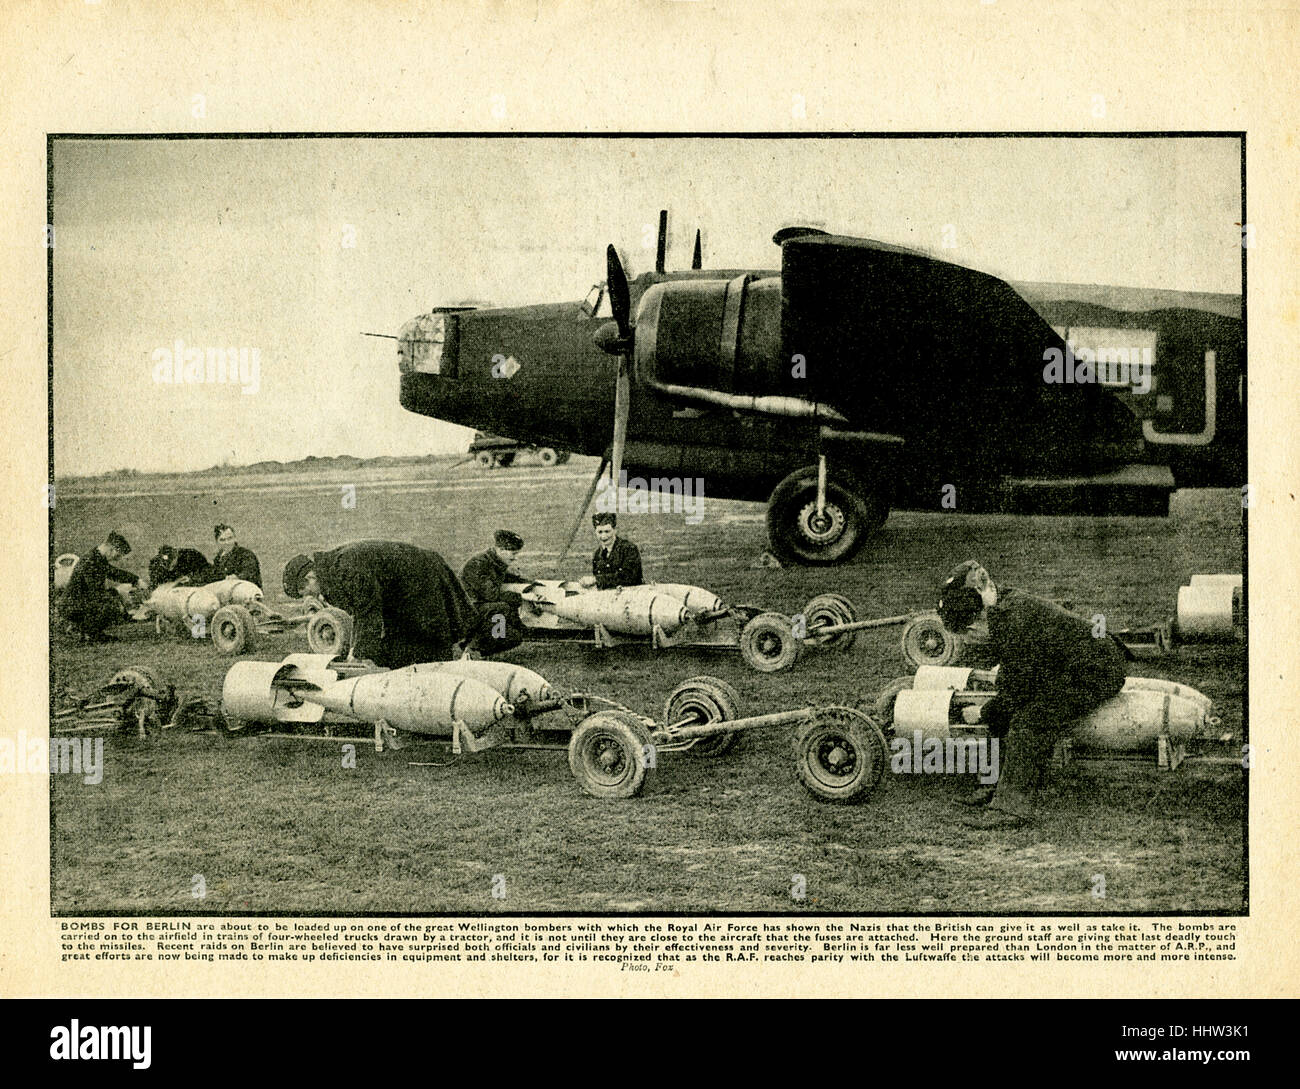 Bombs for Berlin are about to be loaded up on one of the great Wellington bombers with which the royal Air Force has shown the Nazis that the British can give it as well as take it…. Here the ground staff are giving that last deadly touch to the missiles. Recent raids on Berlin are believed to have surprised both officials and civilians by their effectiveness and severity.' Caption in The War. Stock Photo